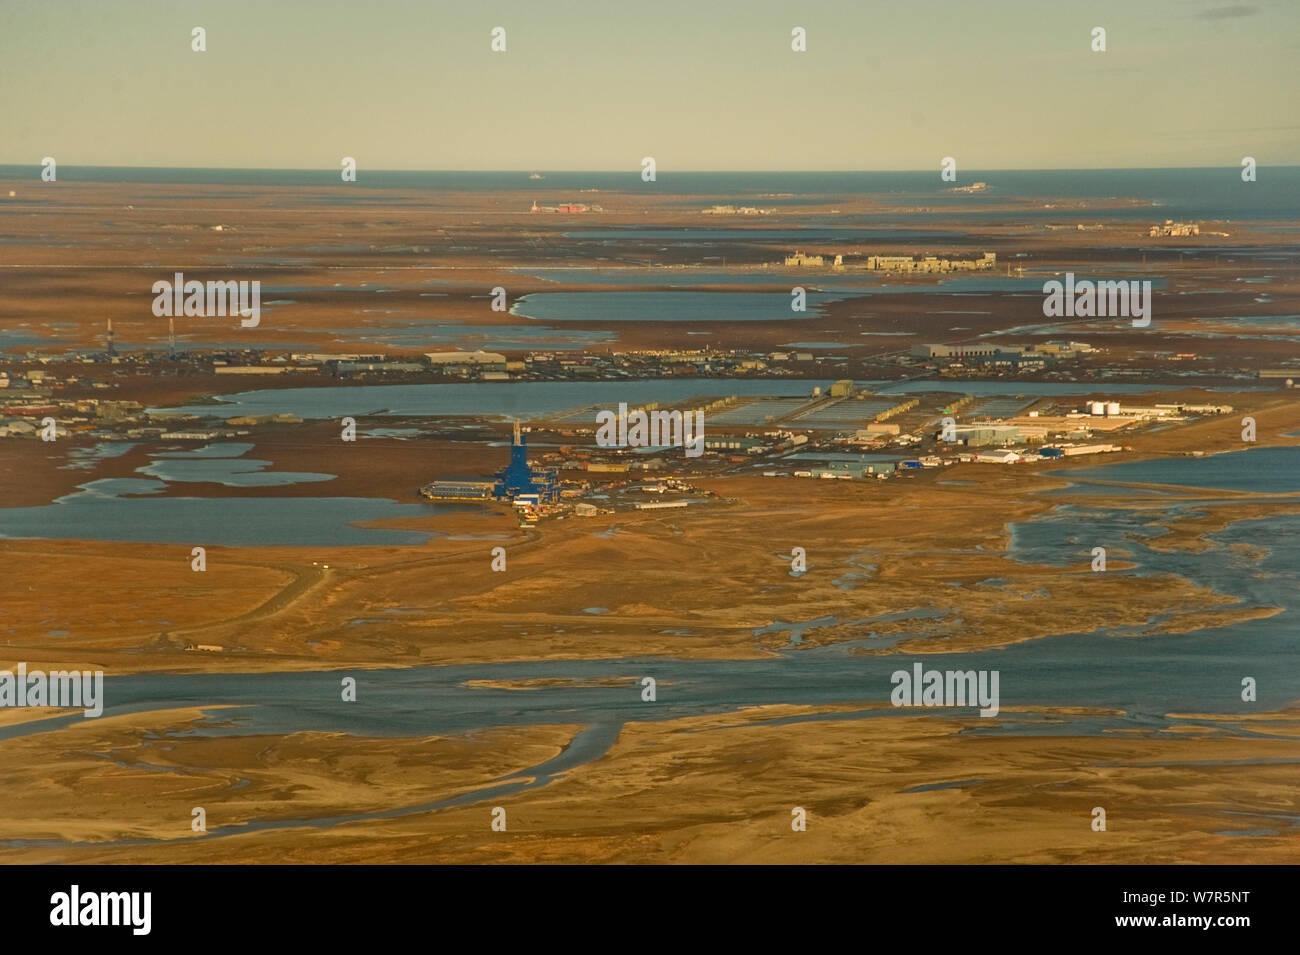 Aerial landscape view of Prudhoe Bay oil fields, central arctic coast, North Slope, Alaska. Stock Photo